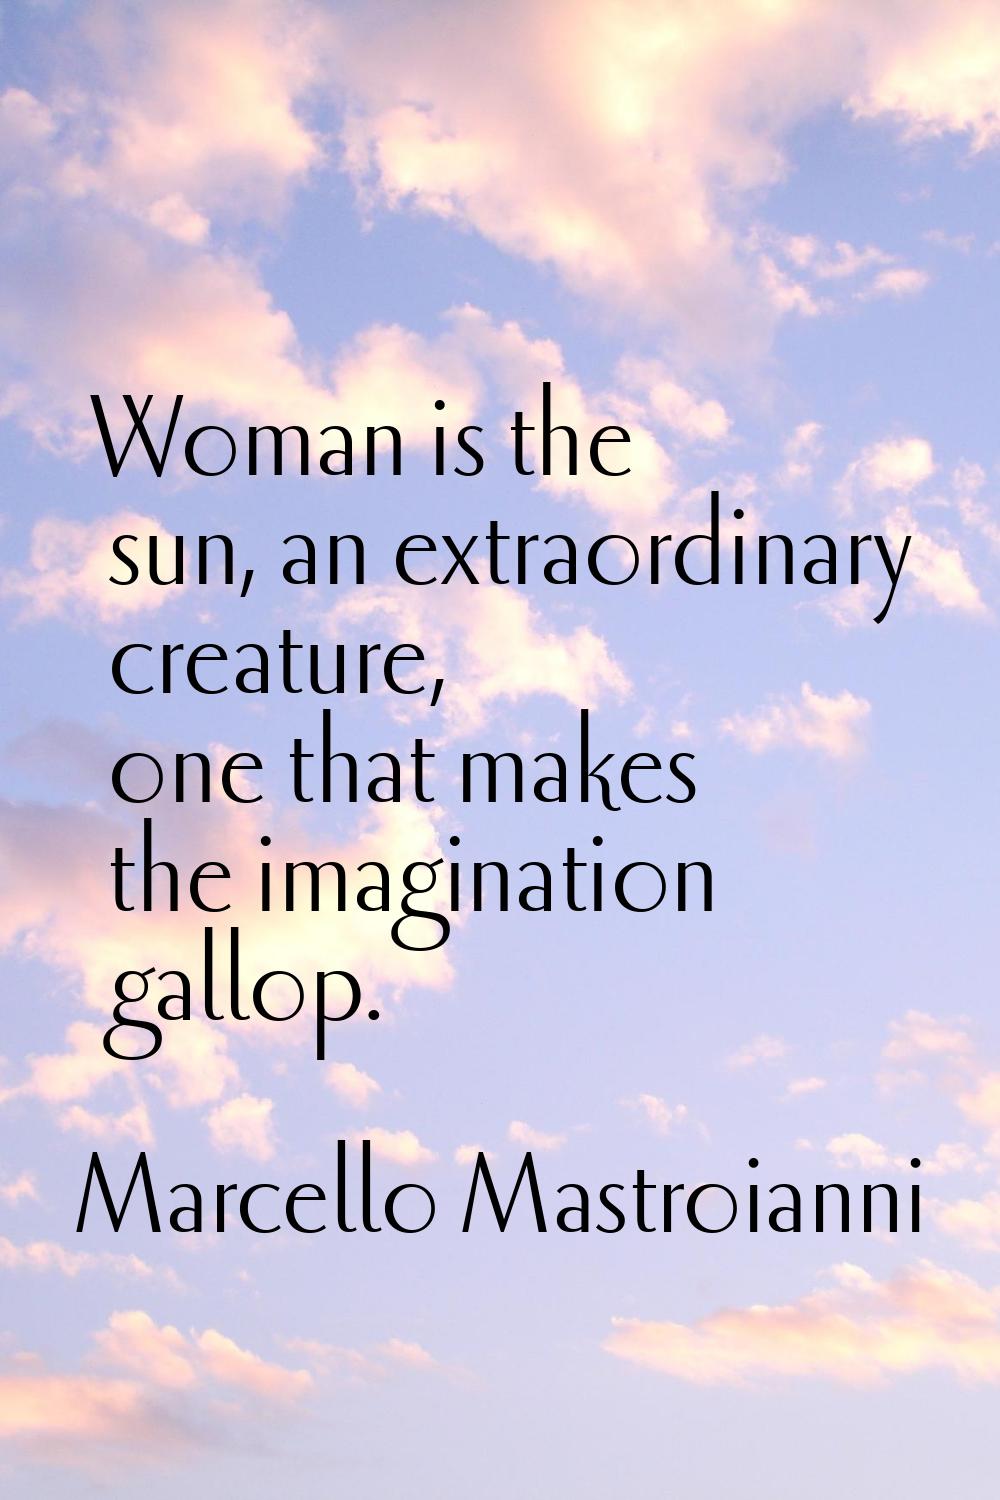 Woman is the sun, an extraordinary creature, one that makes the imagination gallop.